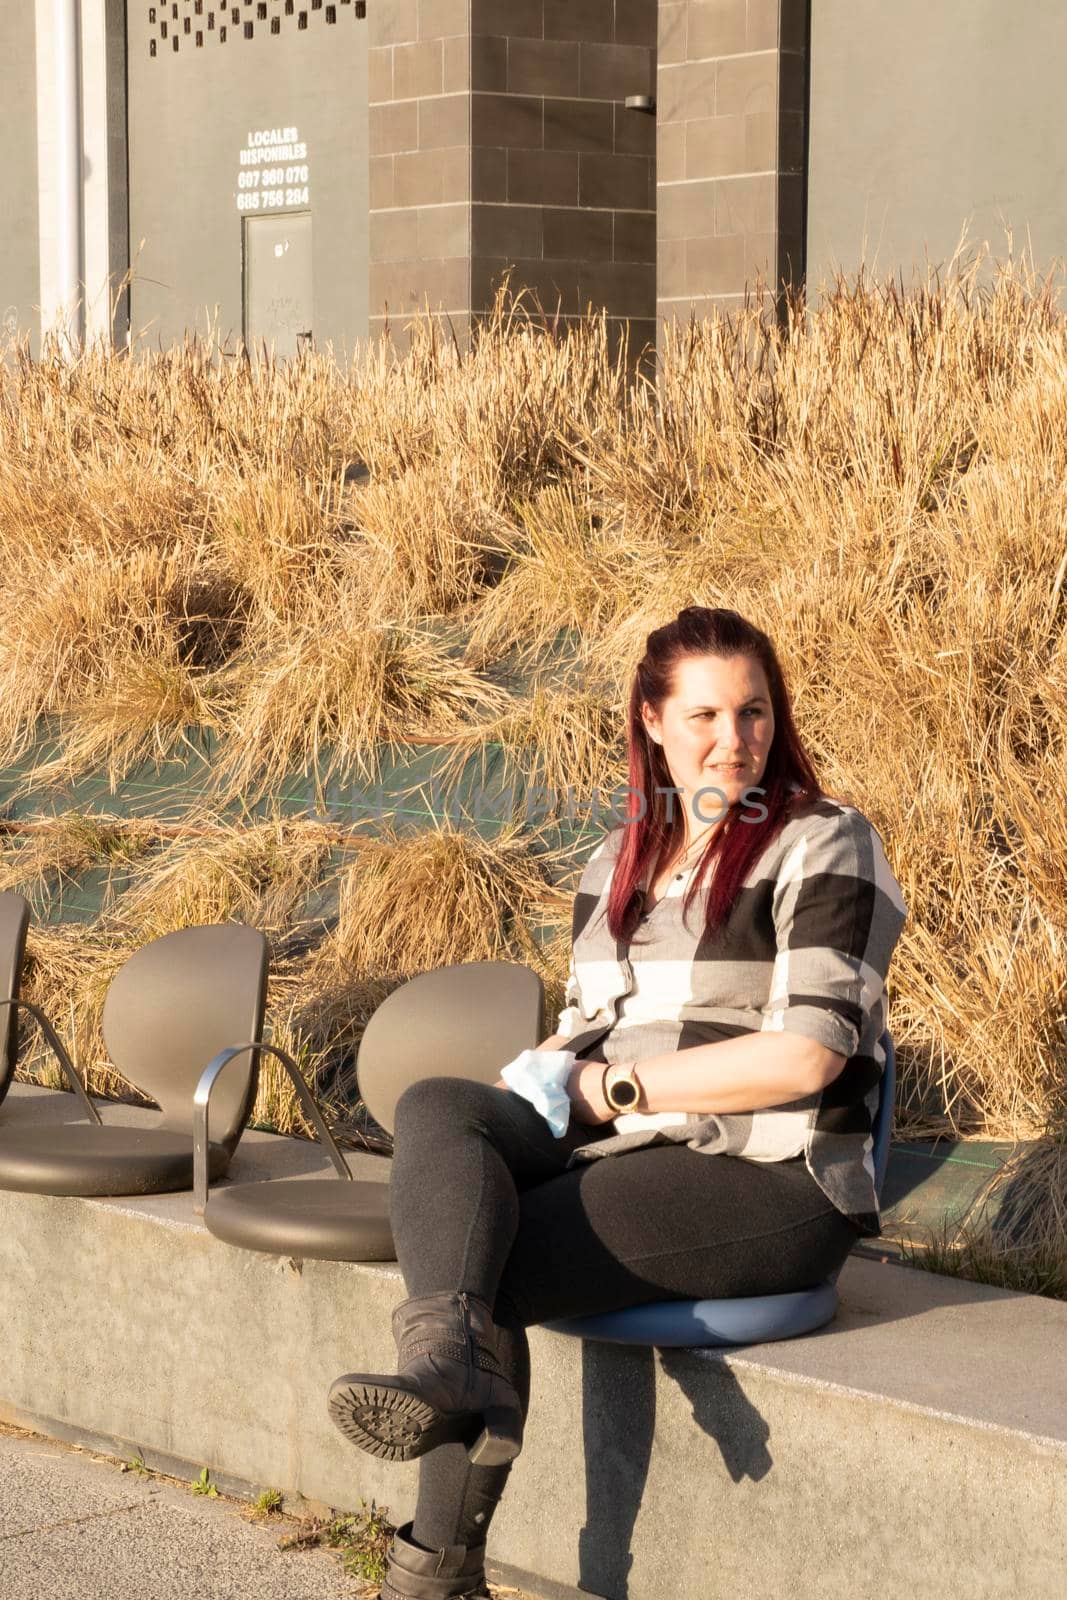 Young woman posing sitting on a bench, wearing a plaid shirt and reddish hair. casual look